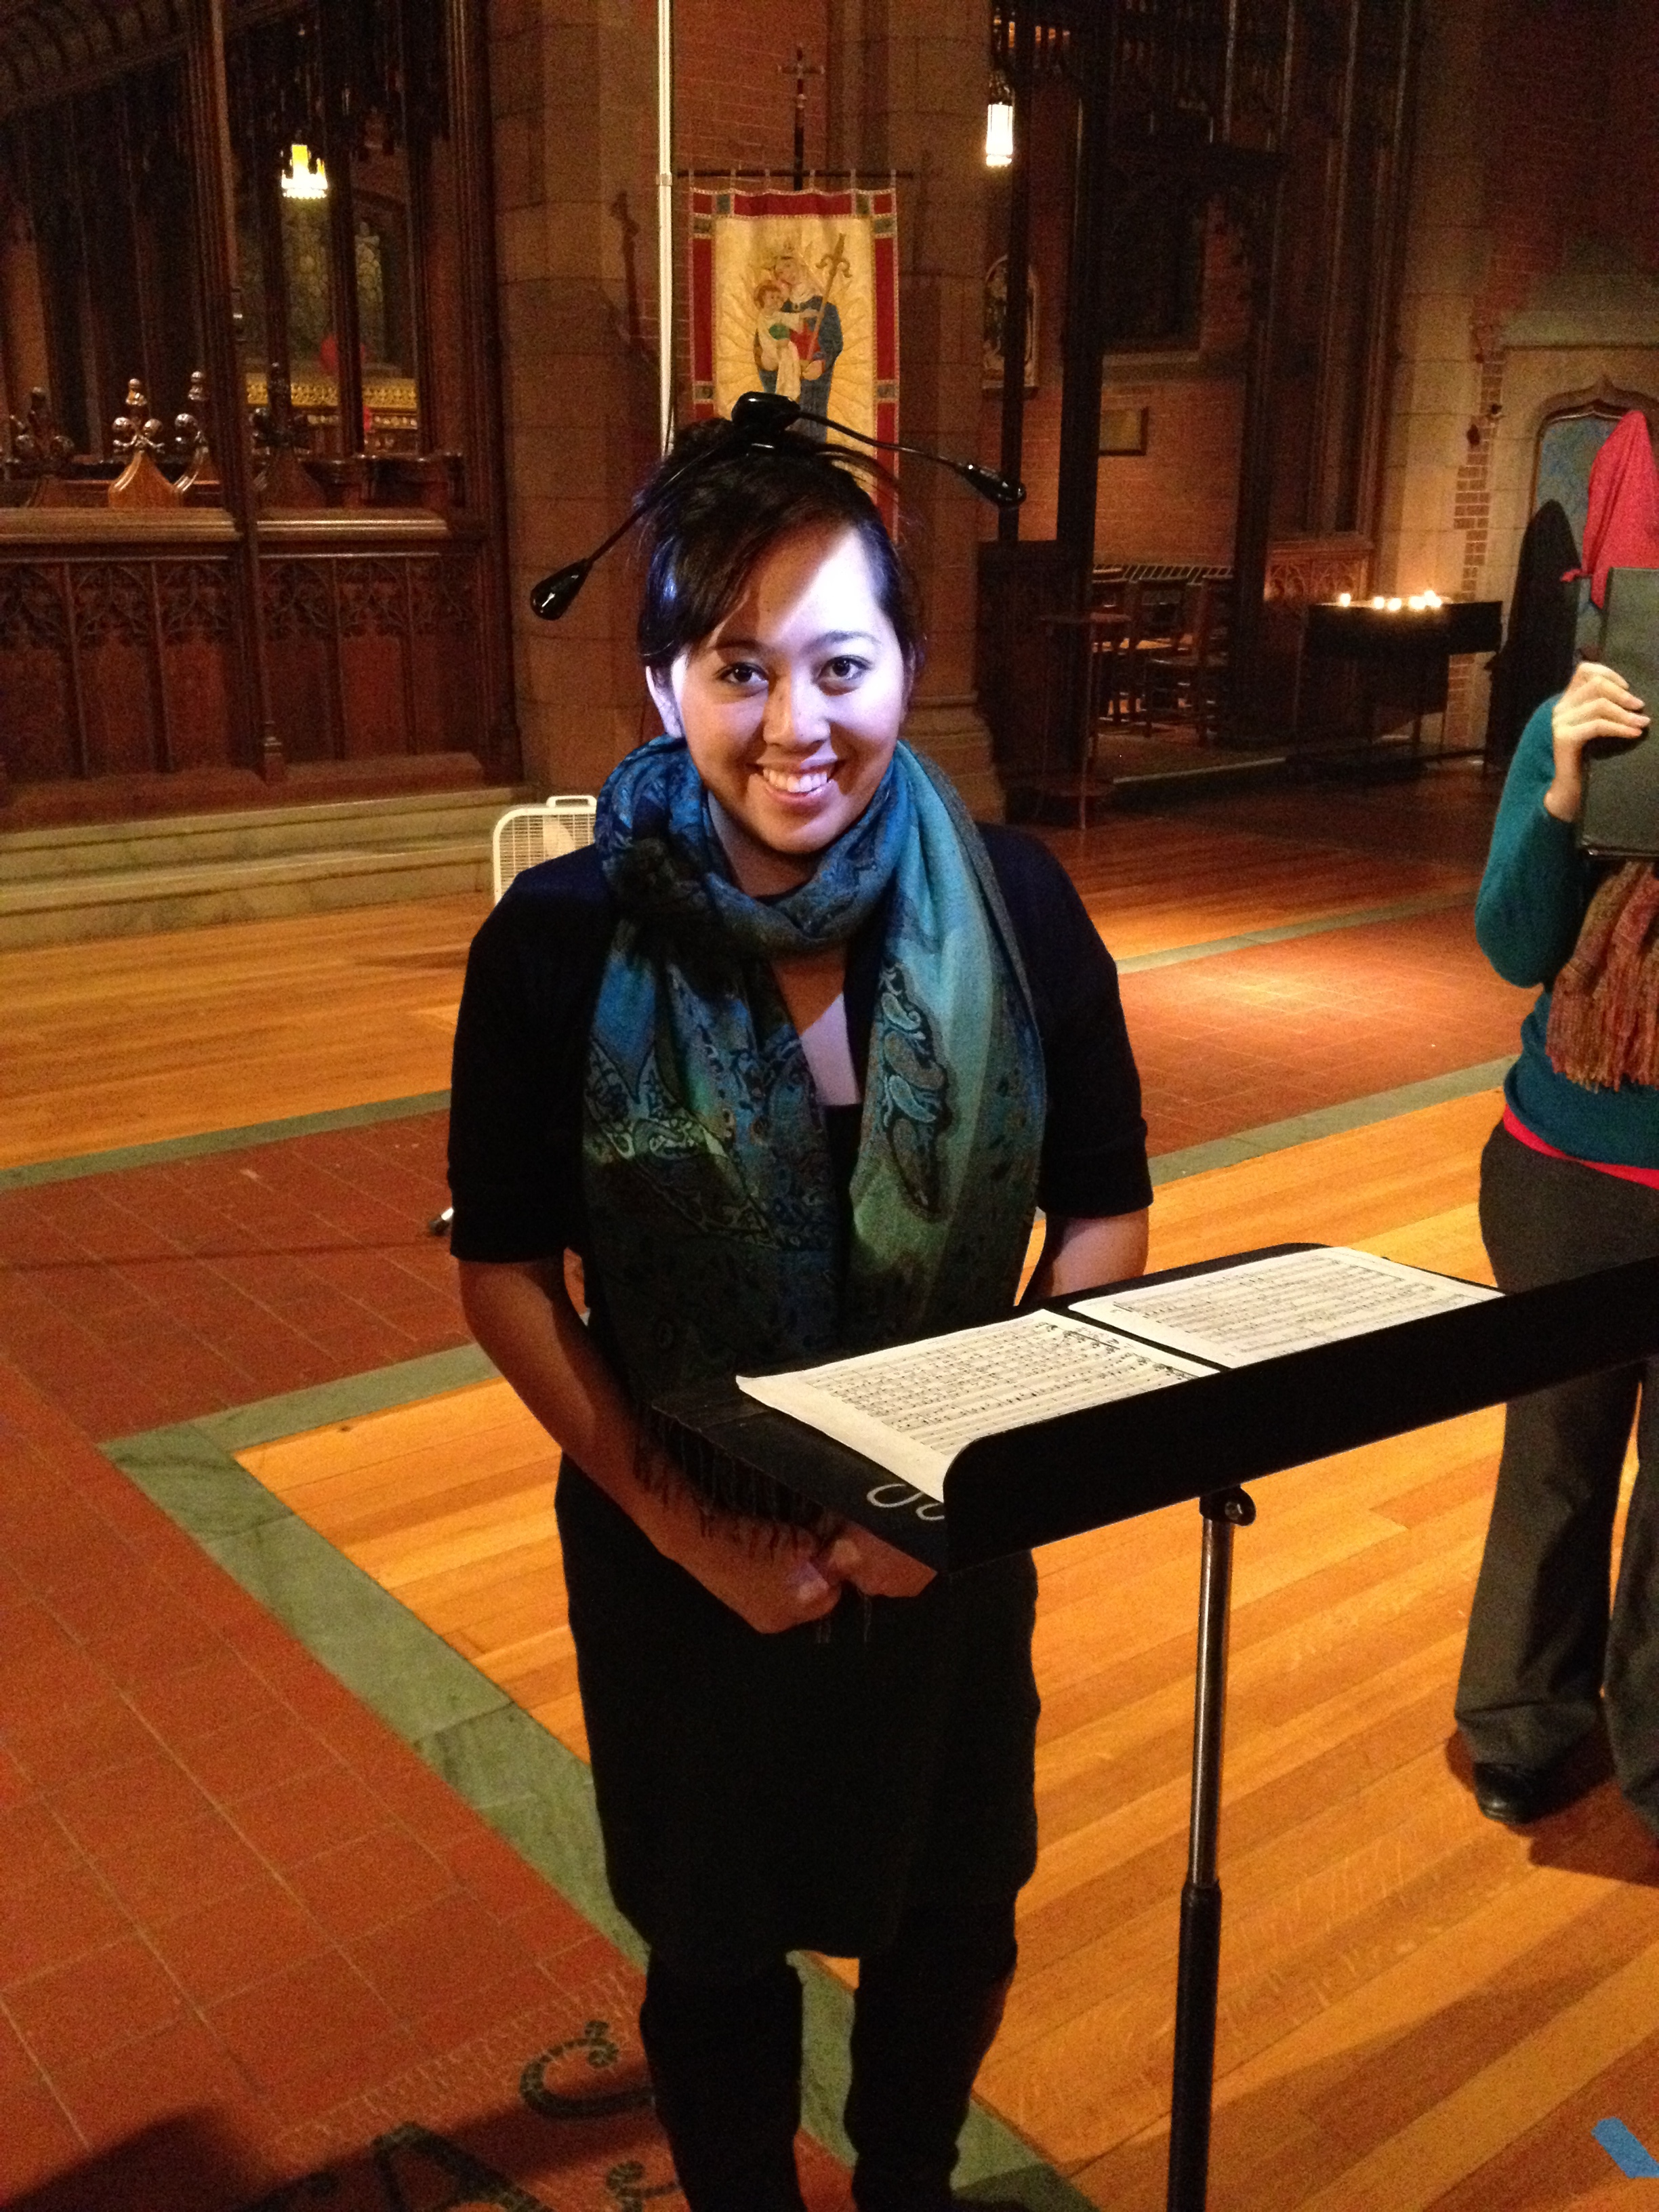 Arianne Abela sheds additional light on her music with some cleverly-placed music stand lights in Christ Church, New Haven